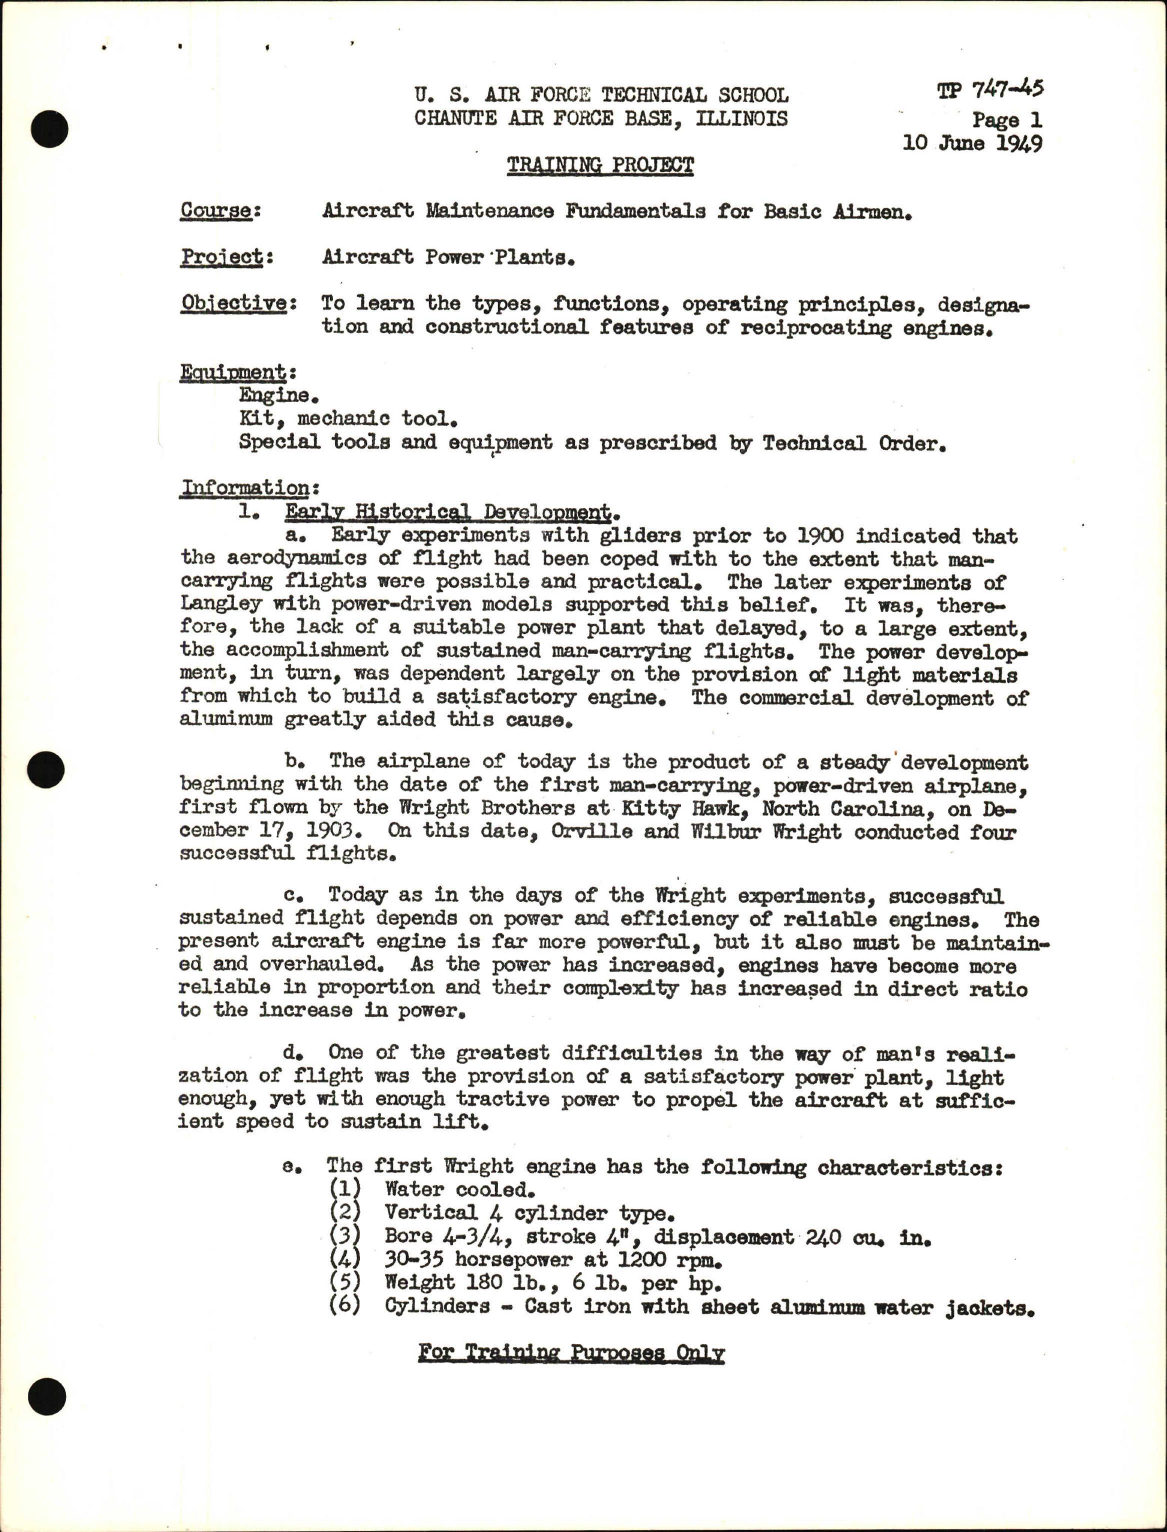 Sample page 1 from AirCorps Library document: Training Project, Aircraft Power Plants